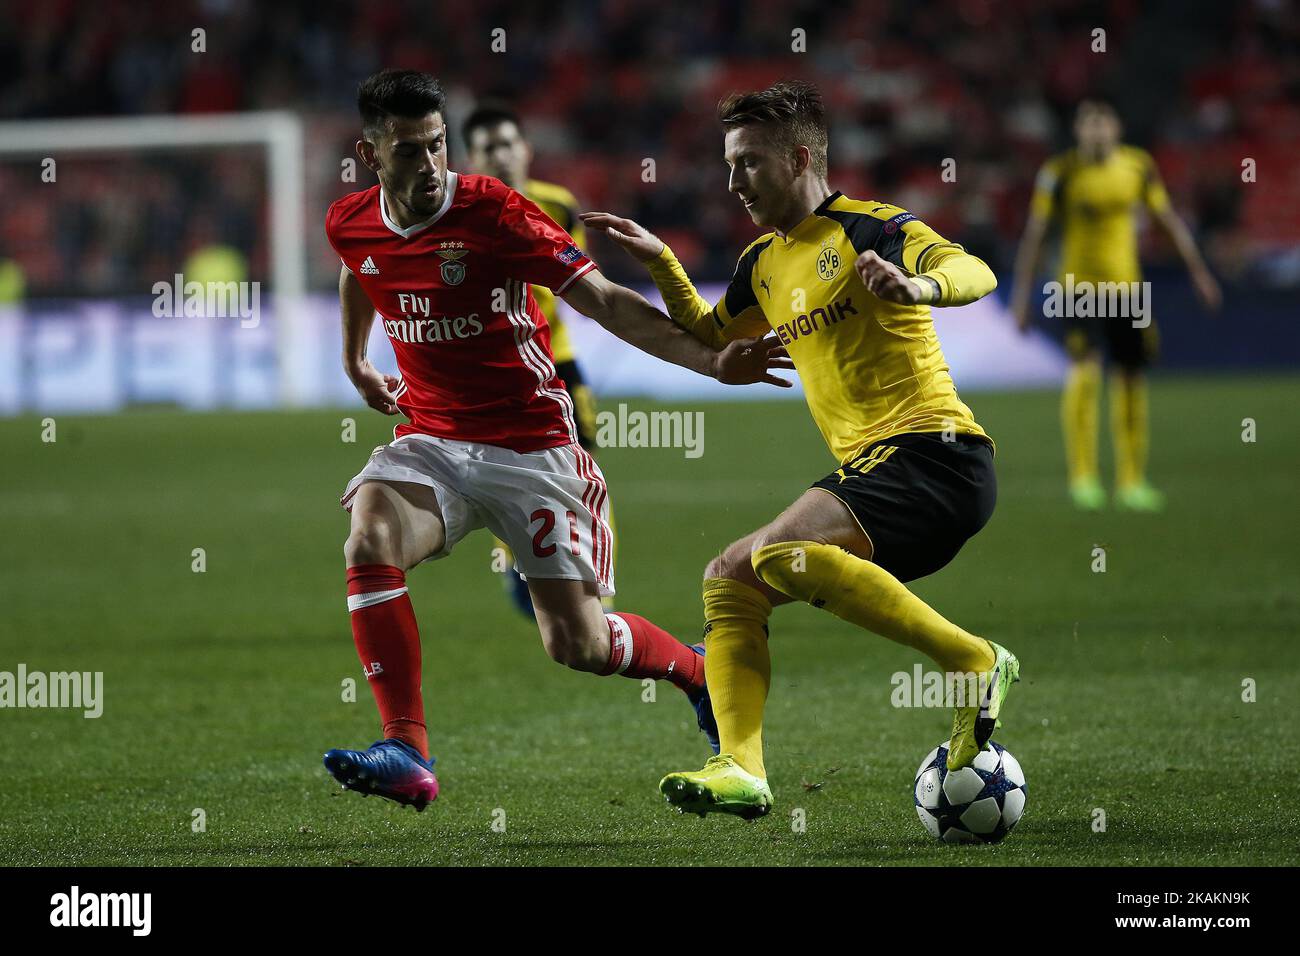 Benfica's forward Pizzi (L) vies for the ball with Dortmund's midfielder Marco Reus (R) during Champions League 2016/17 match between SL Benfica vs BVB Borussia Dortmund, in Lisbon, on February 14, 2017. (Photo by Carlos Palma/NurPhoto) *** Please Use Credit from Credit Field *** Stock Photo